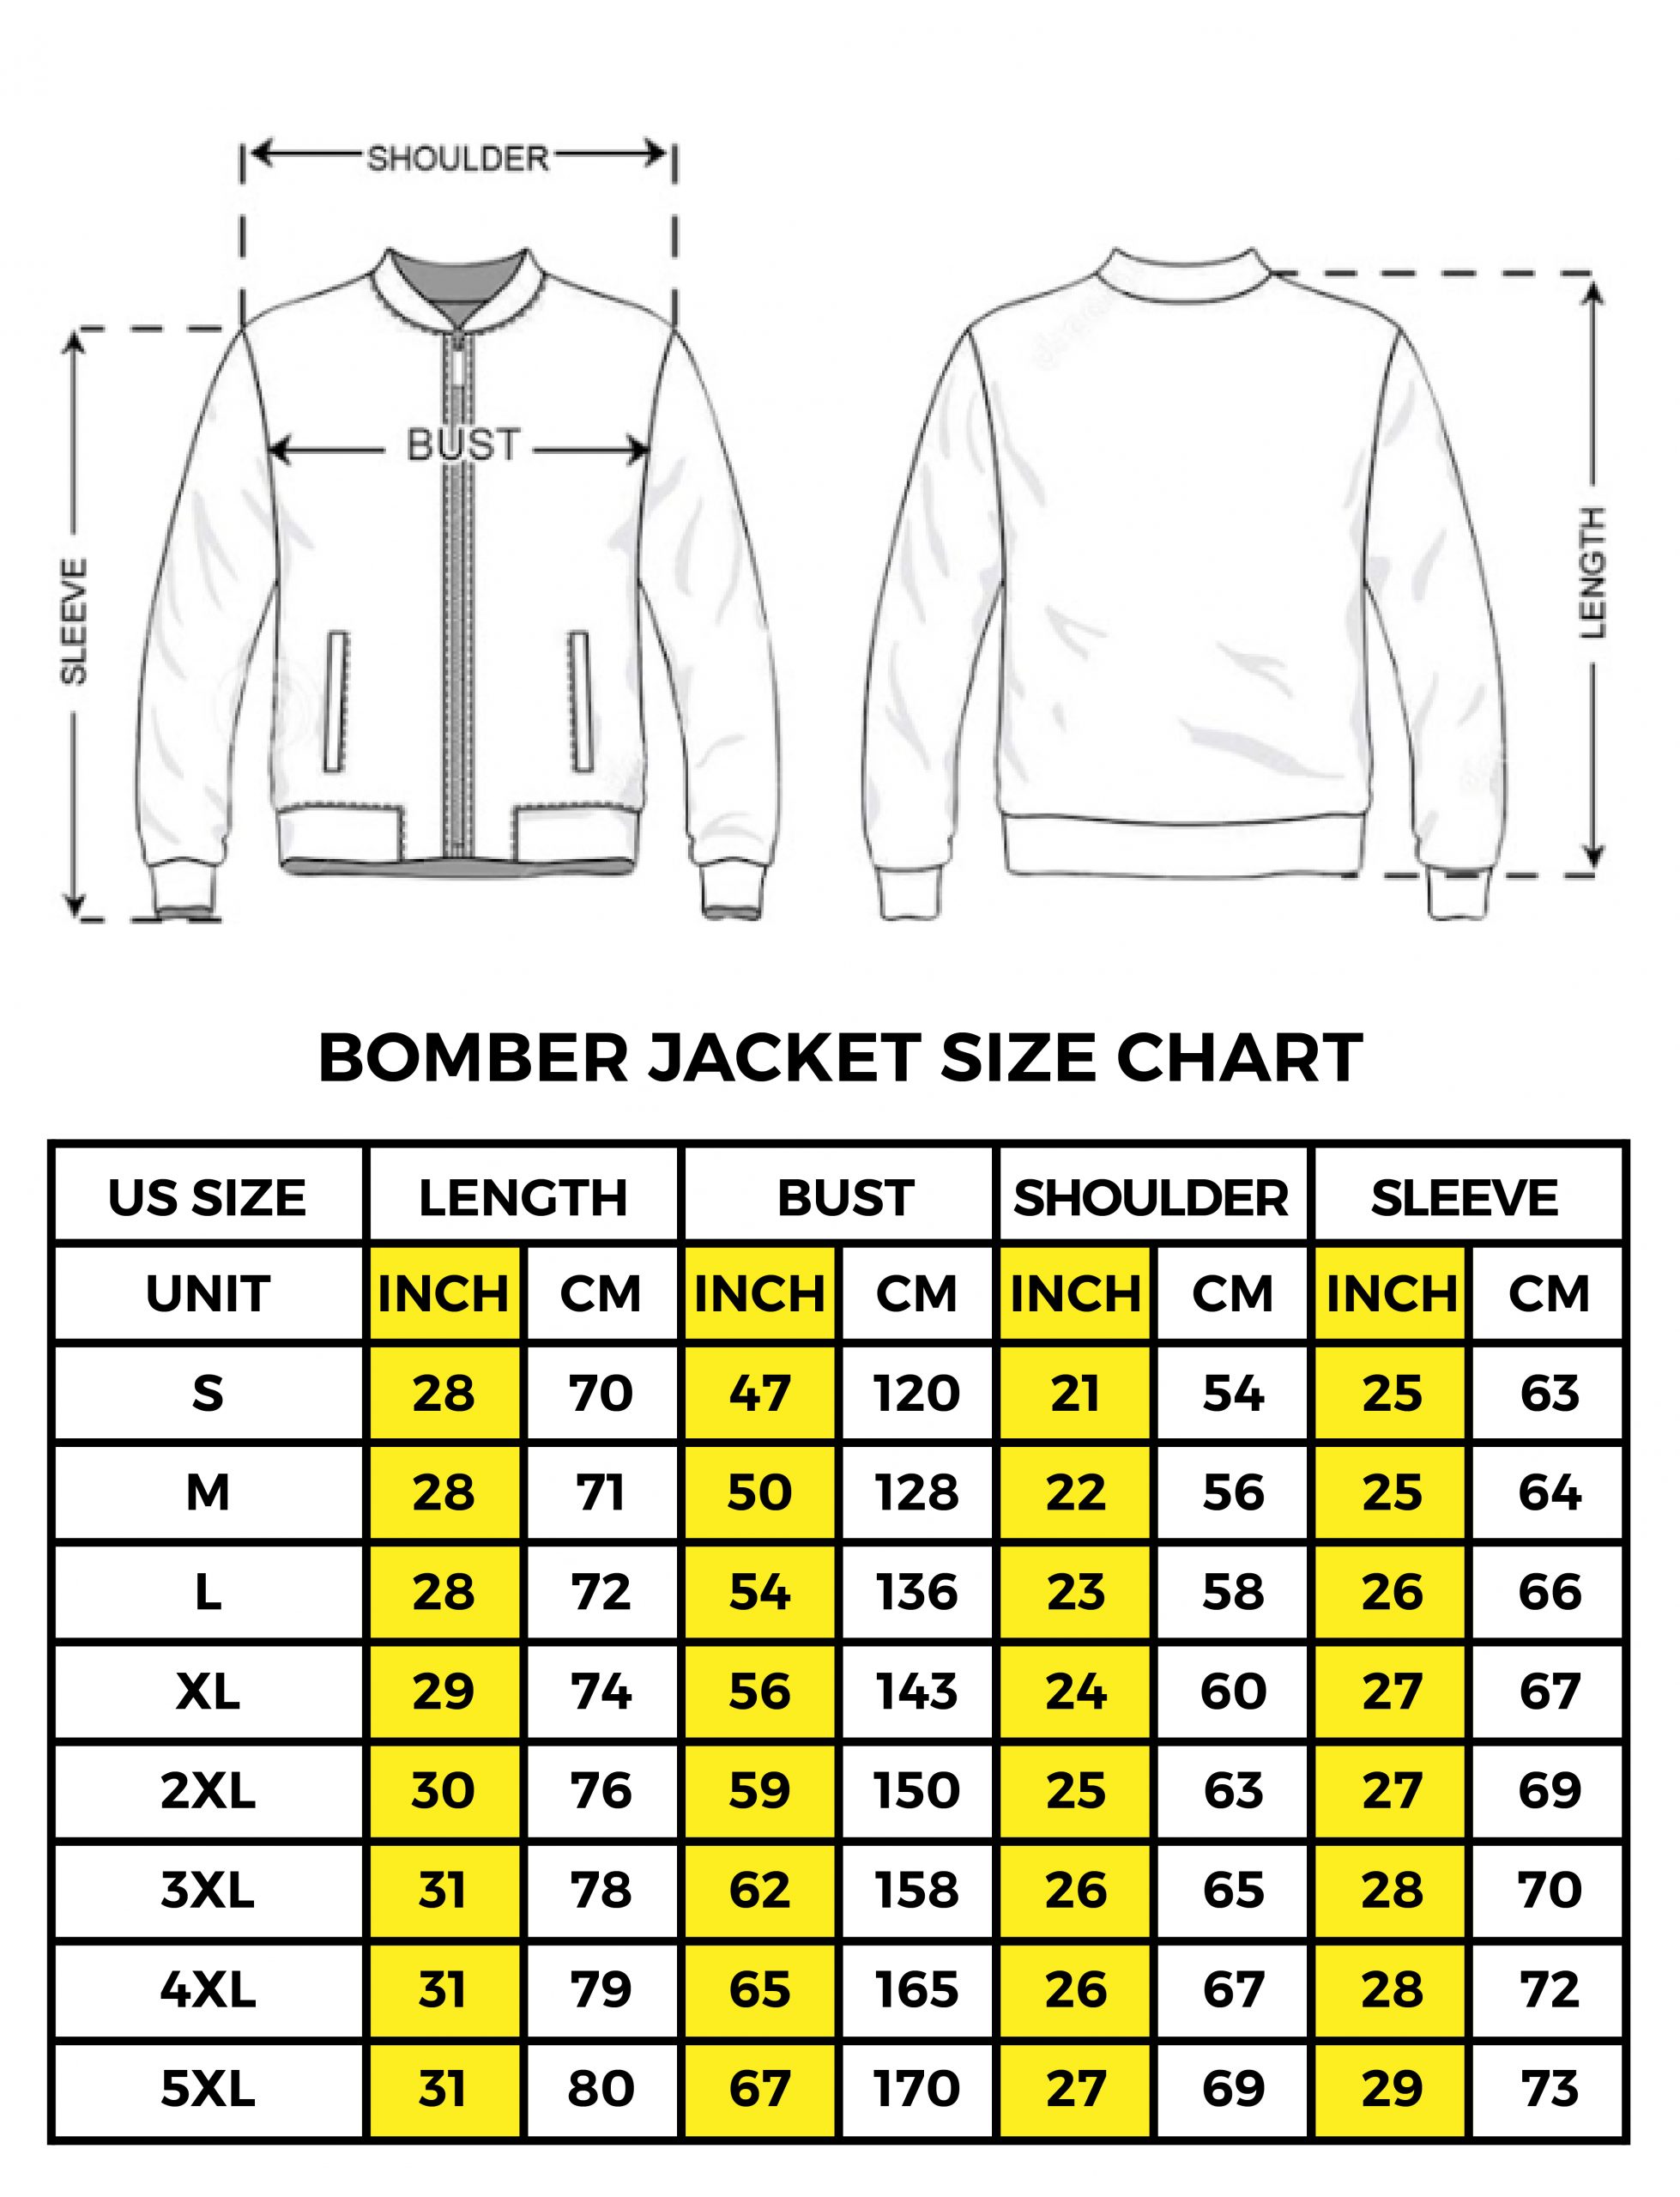 bomber jacket size chart 01 scaled 1 - Dead By Daylight Store